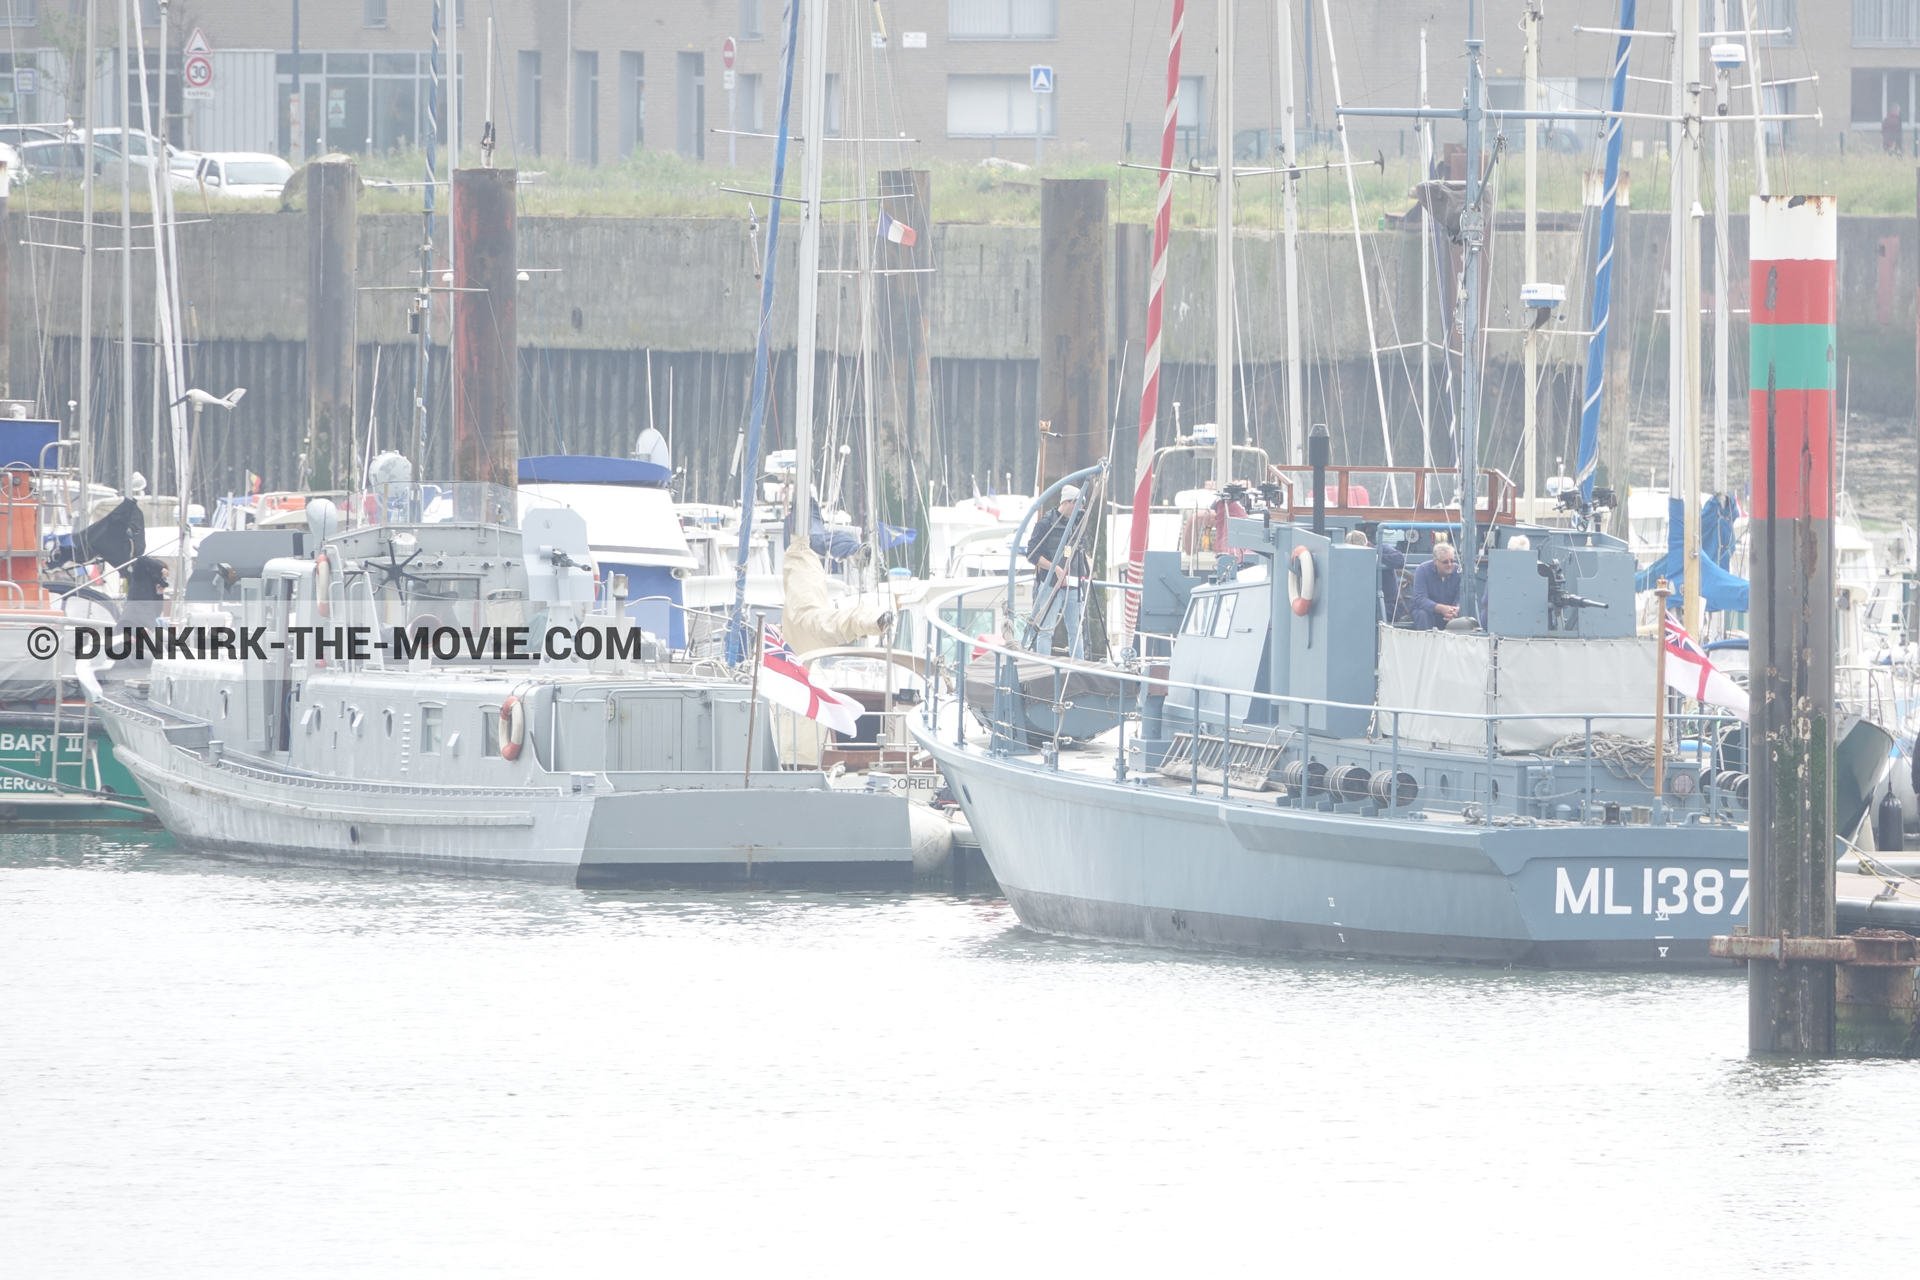 Picture with boat, HMS Medusa - ML1387,  from behind the scene of the Dunkirk movie by Nolan